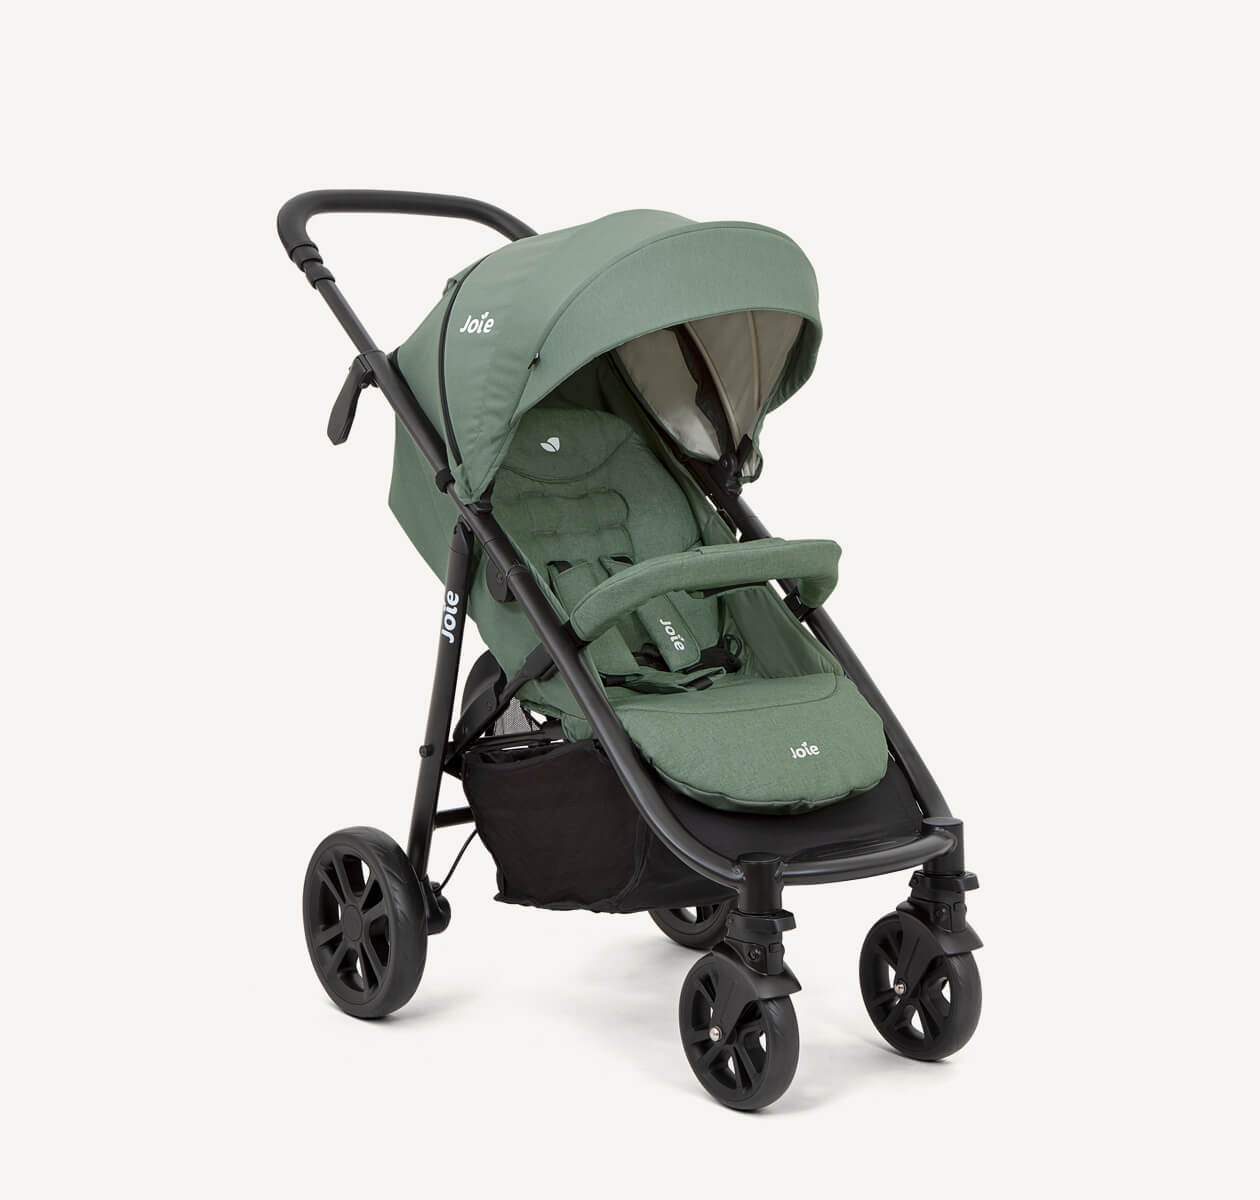 Joie litetrax 4 dlx stroller in green at an angle. 